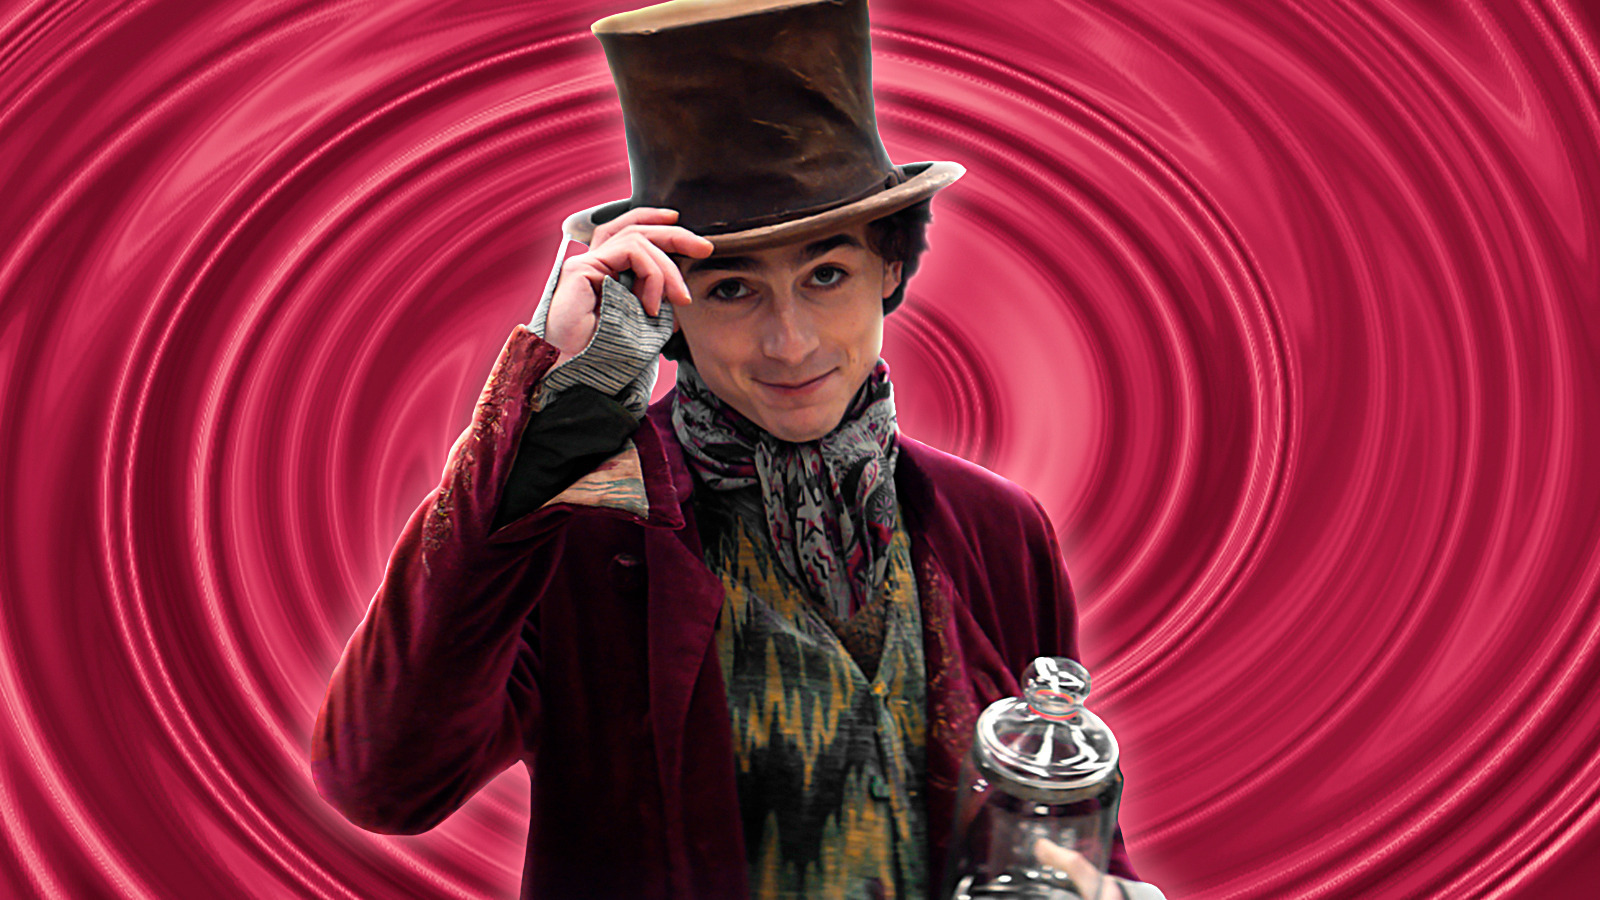 A new Willy Wonka movie could actually work